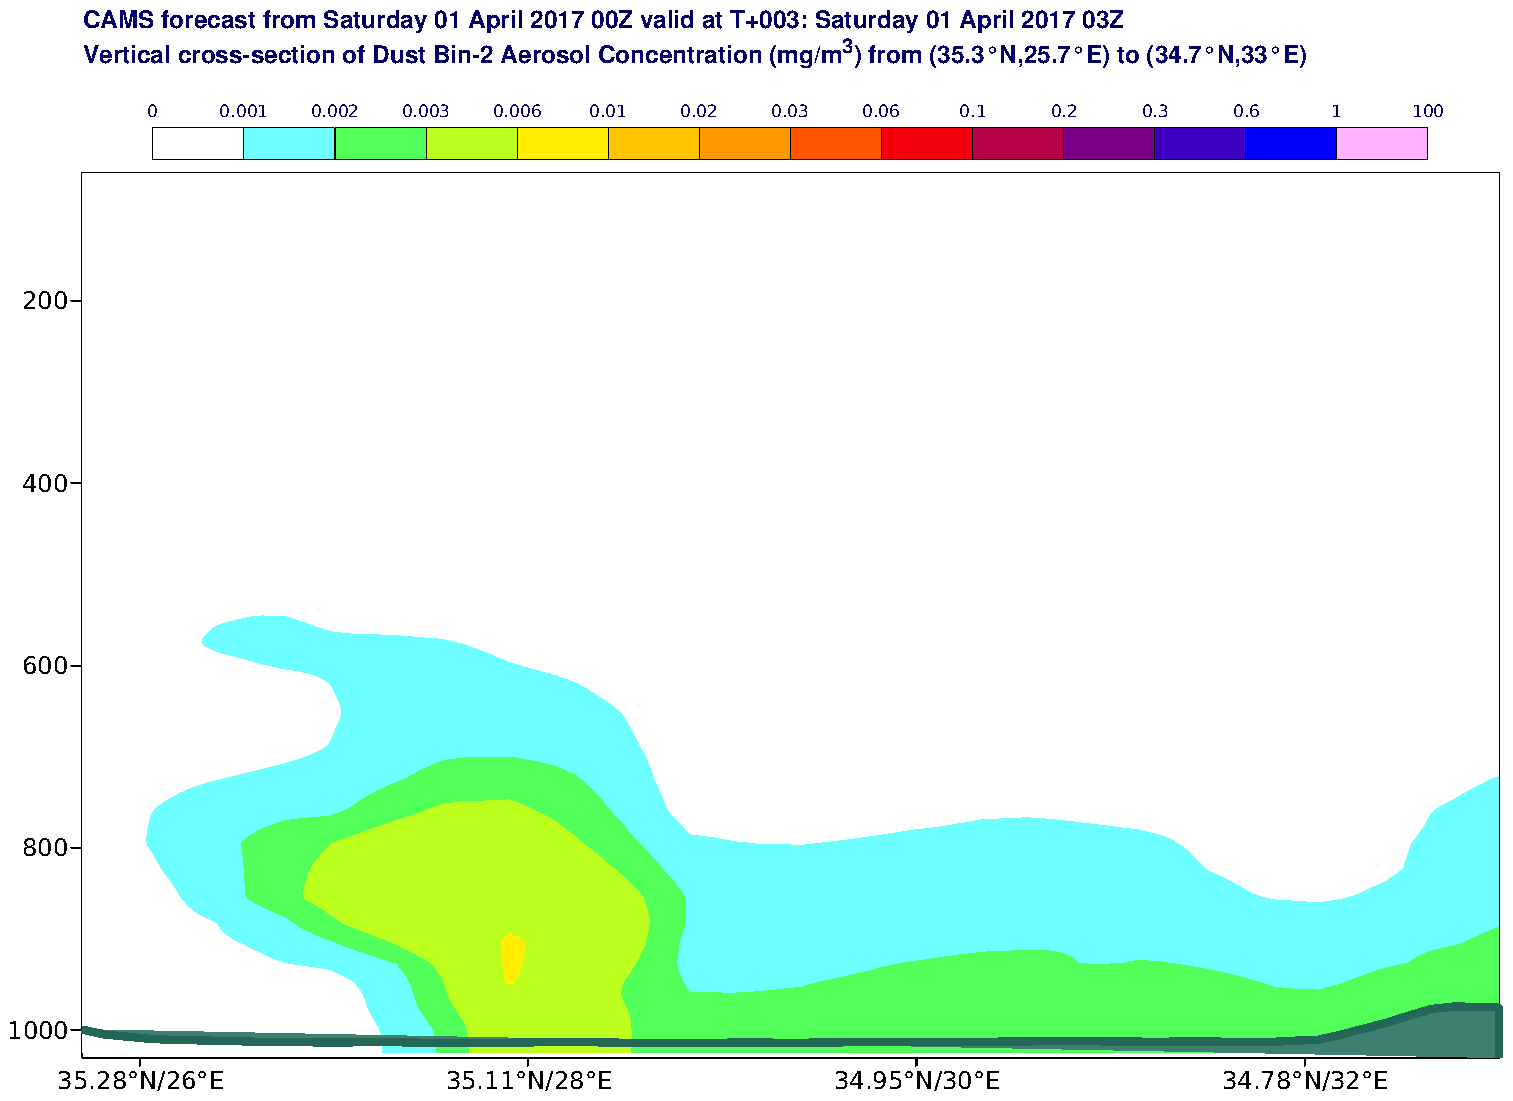 Vertical cross-section of Dust Bin-2 Aerosol Concentration (mg/m3) valid at T3 - 2017-04-01 03:00